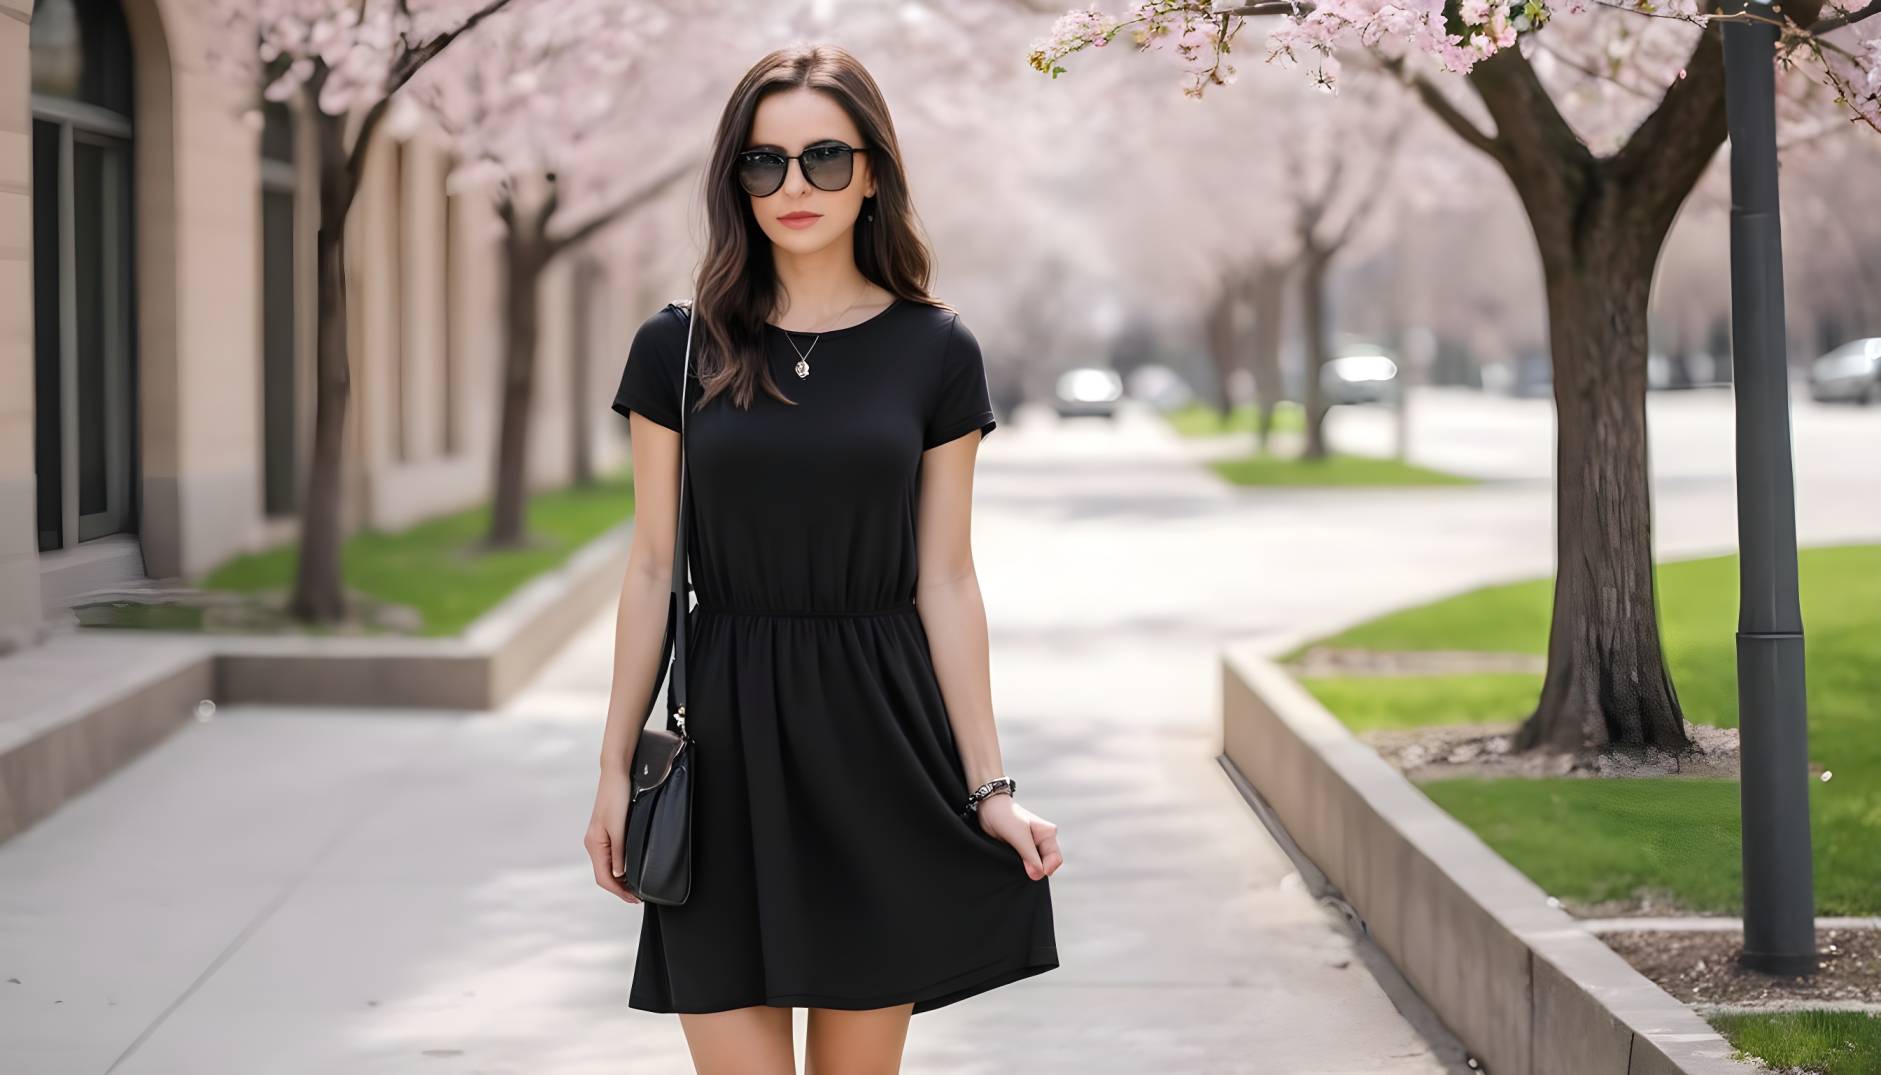 How to Wear a Casual Black Dress for Spring